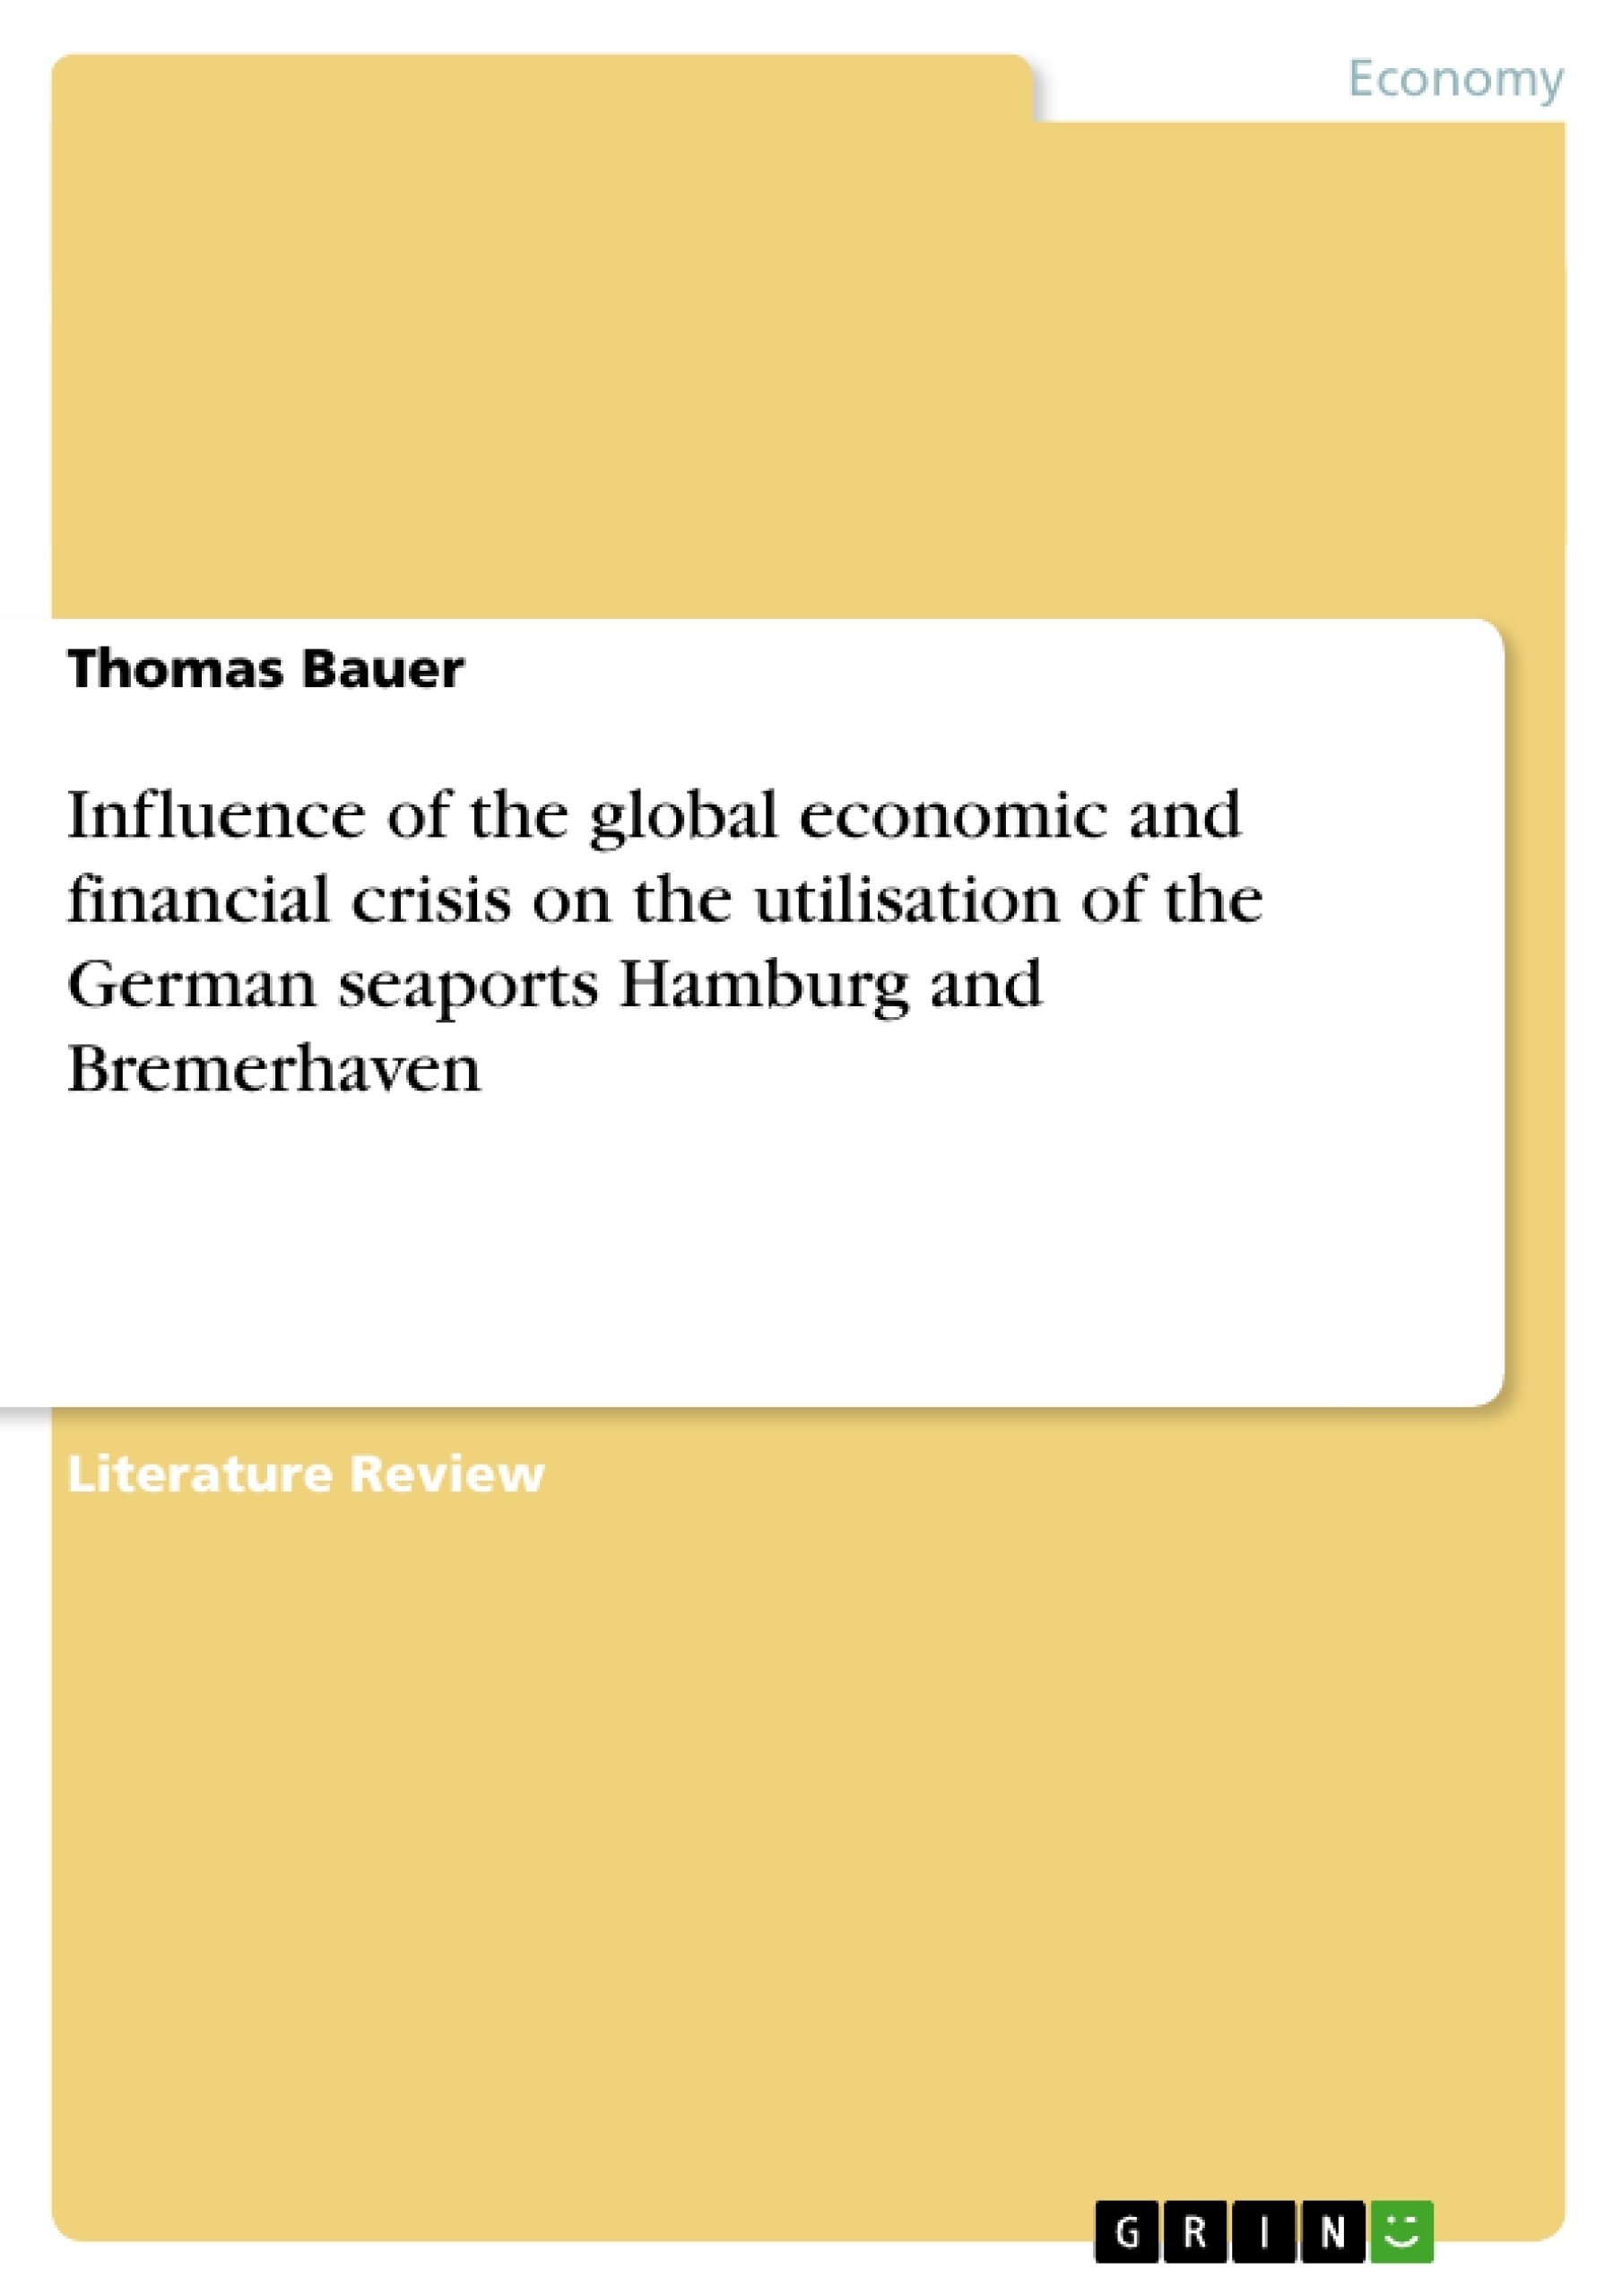 Title: Influence of the global economic and financial crisis on the utilisation of the German seaports Hamburg and Bremerhaven